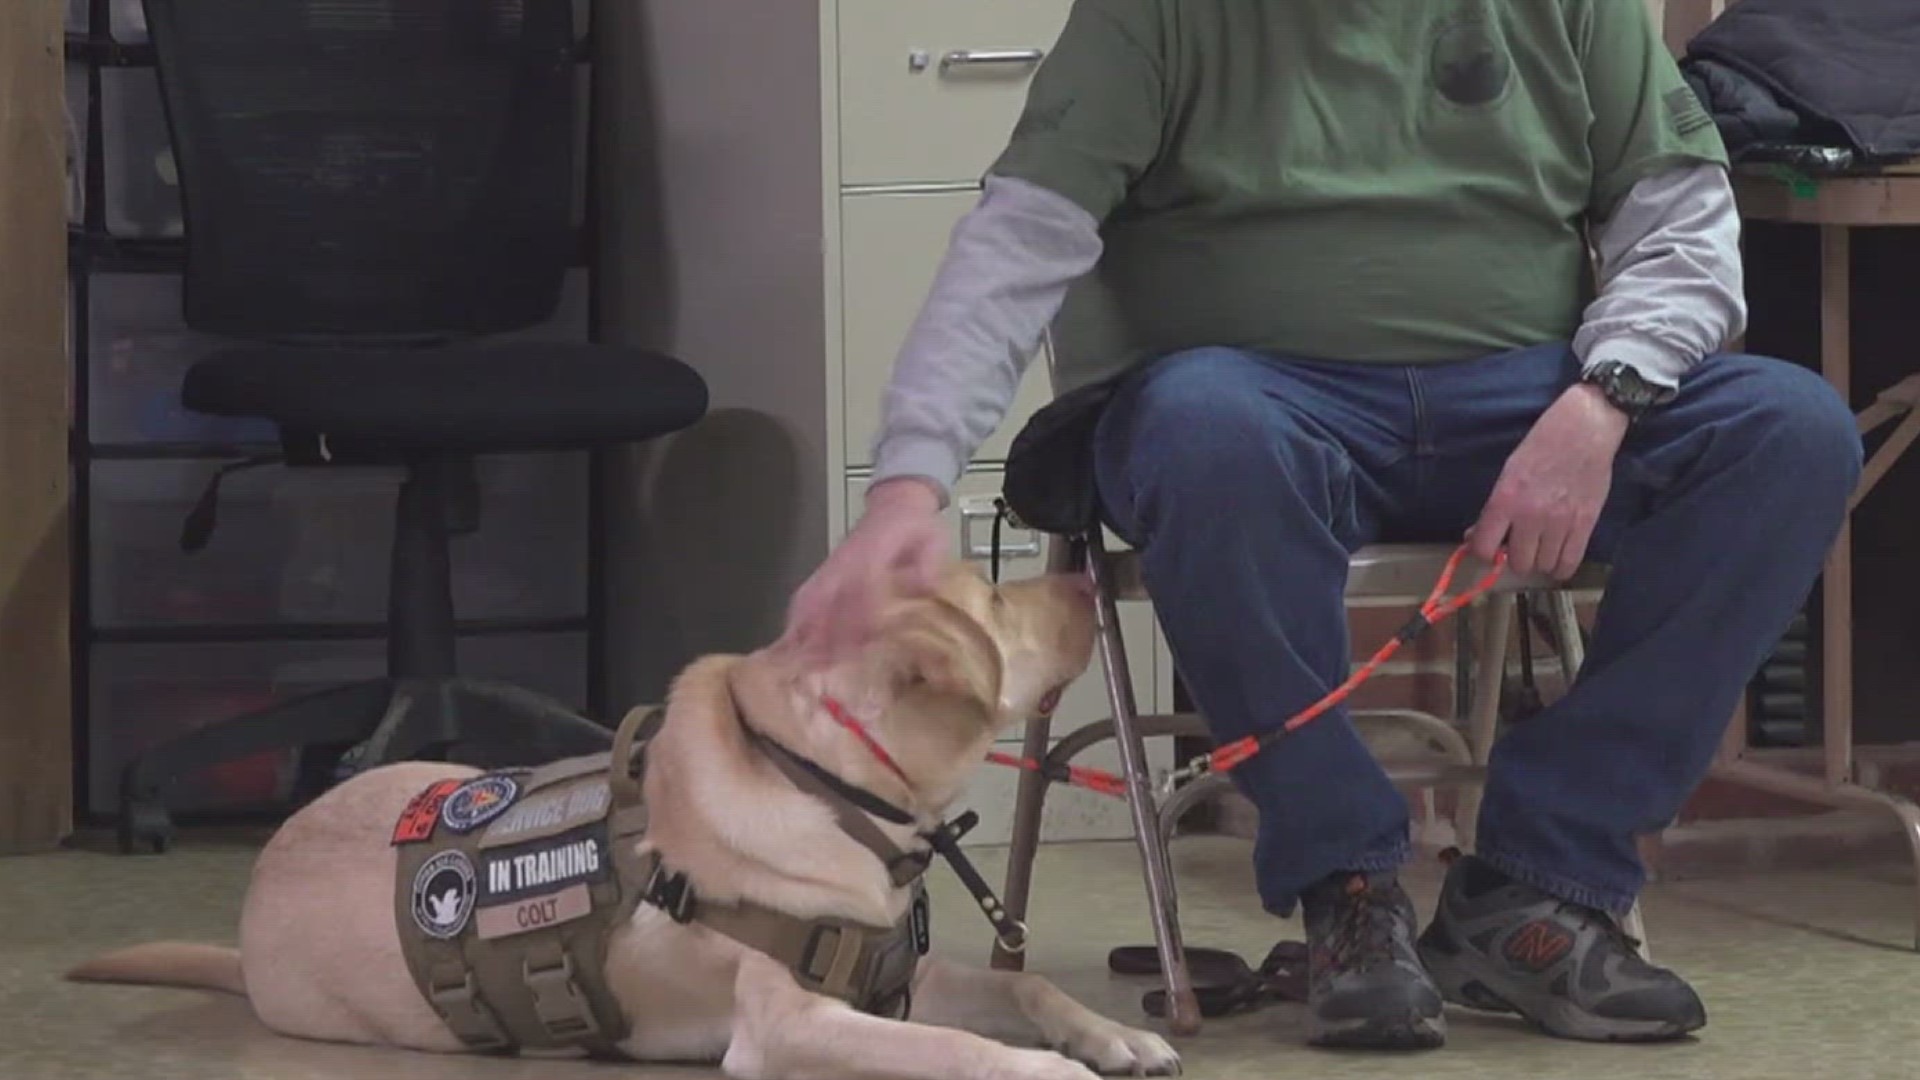 In this week's On the Bright Side, see how Cover Six Canines has been life-changing for veterans and first responders.